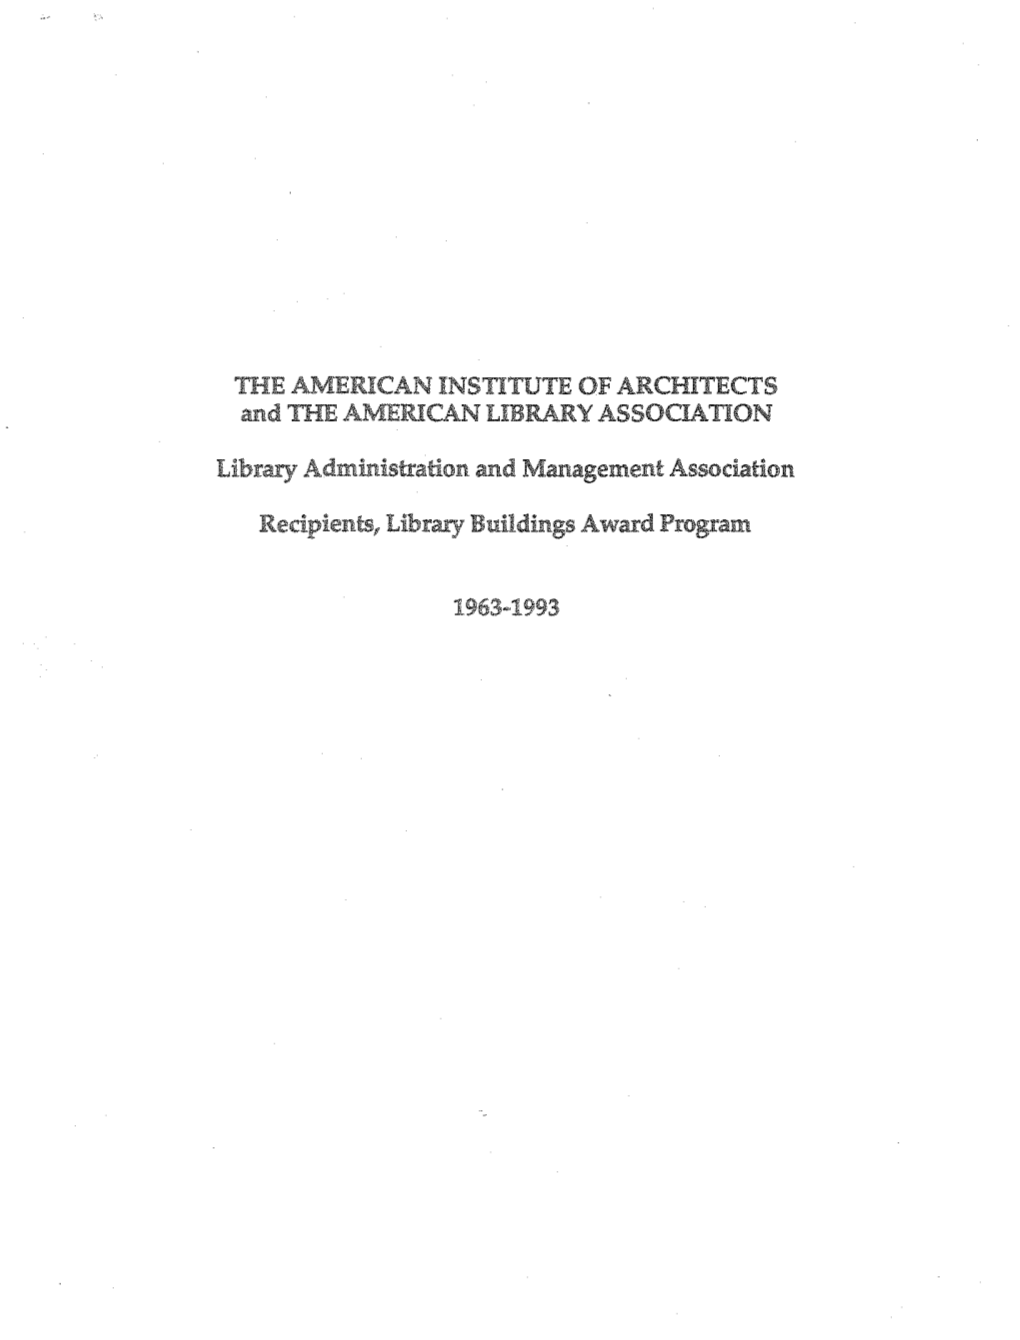 THE AMERICAN INSTITUTE of ARCHITECTS and the AMERICAN LIBRARY ASSOCIATION Library Administration and Management Association Reci